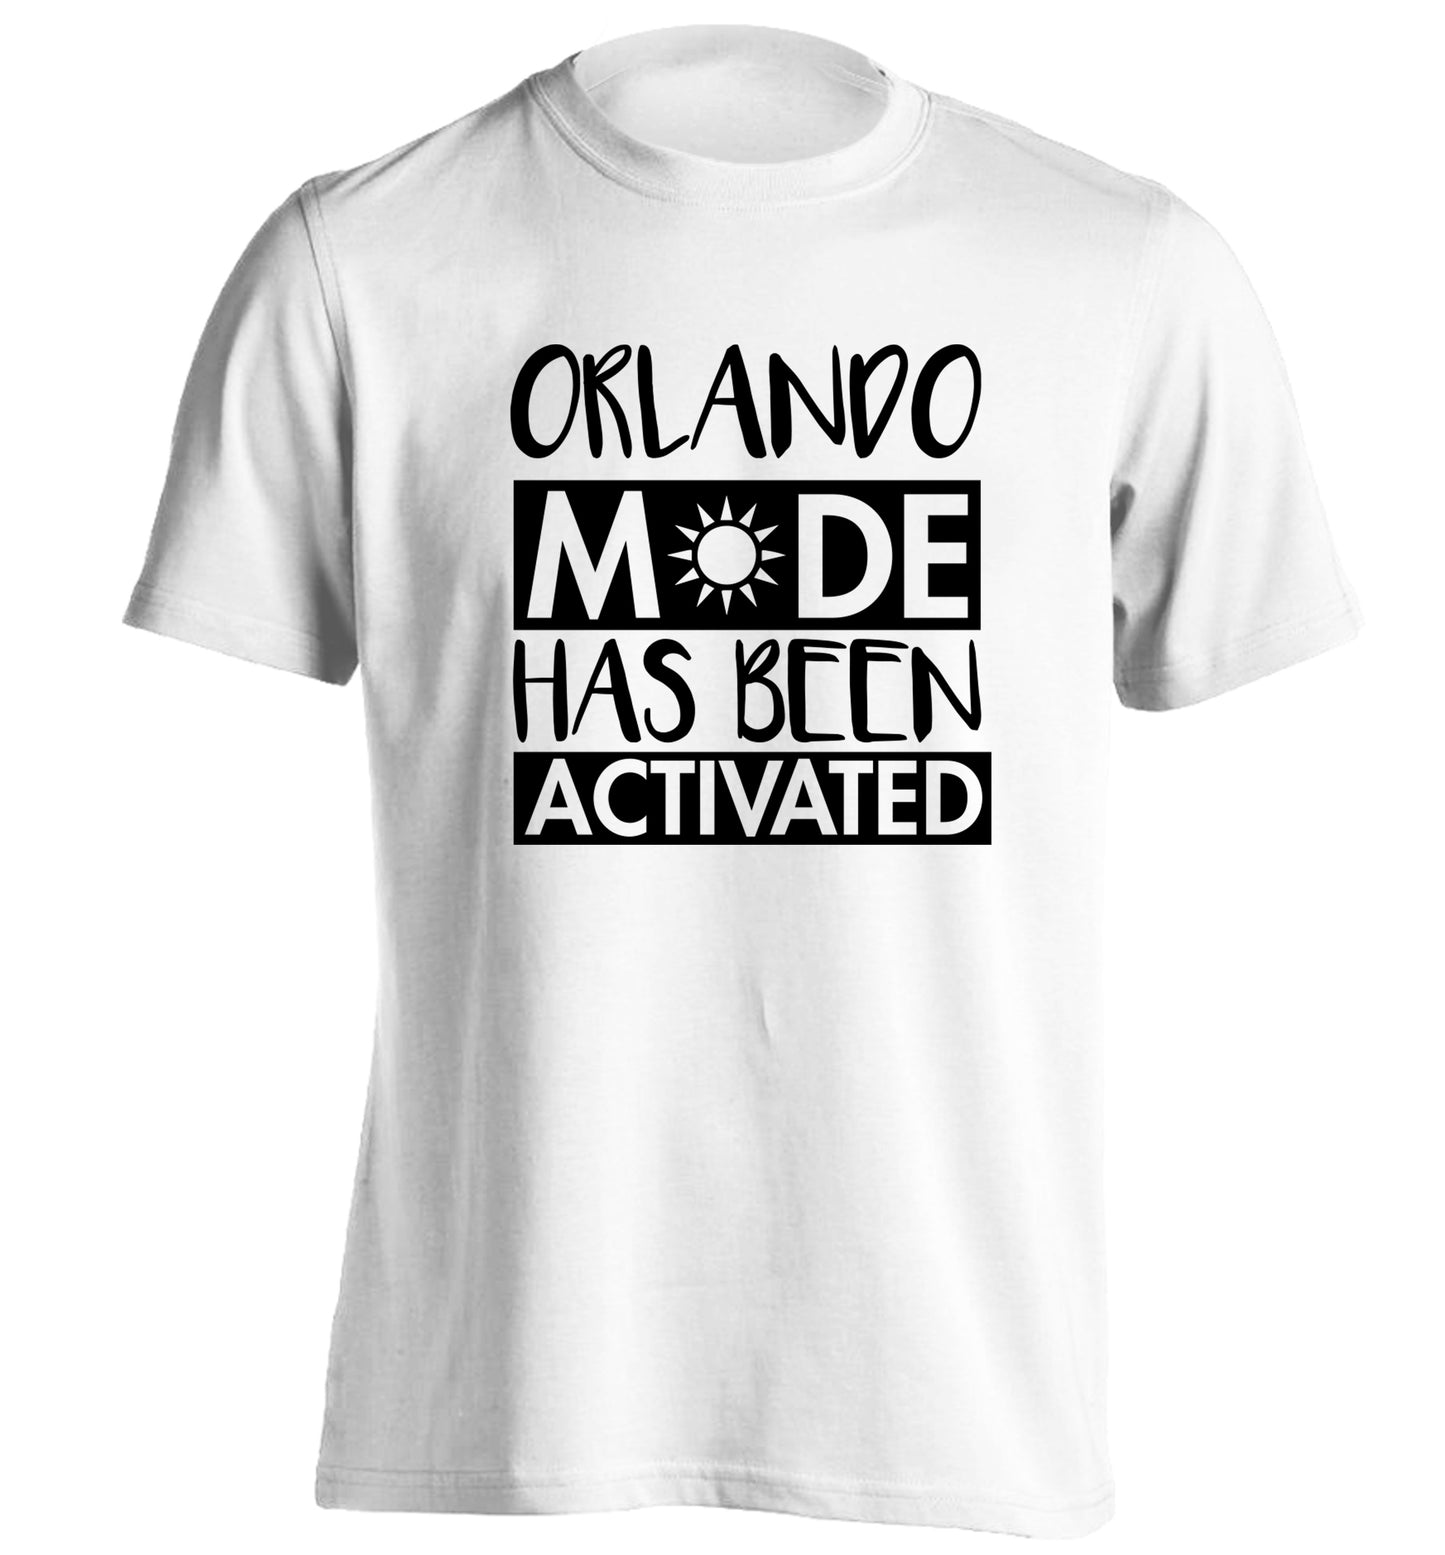 Orlando mode has been activated adults unisex white Tshirt 2XL